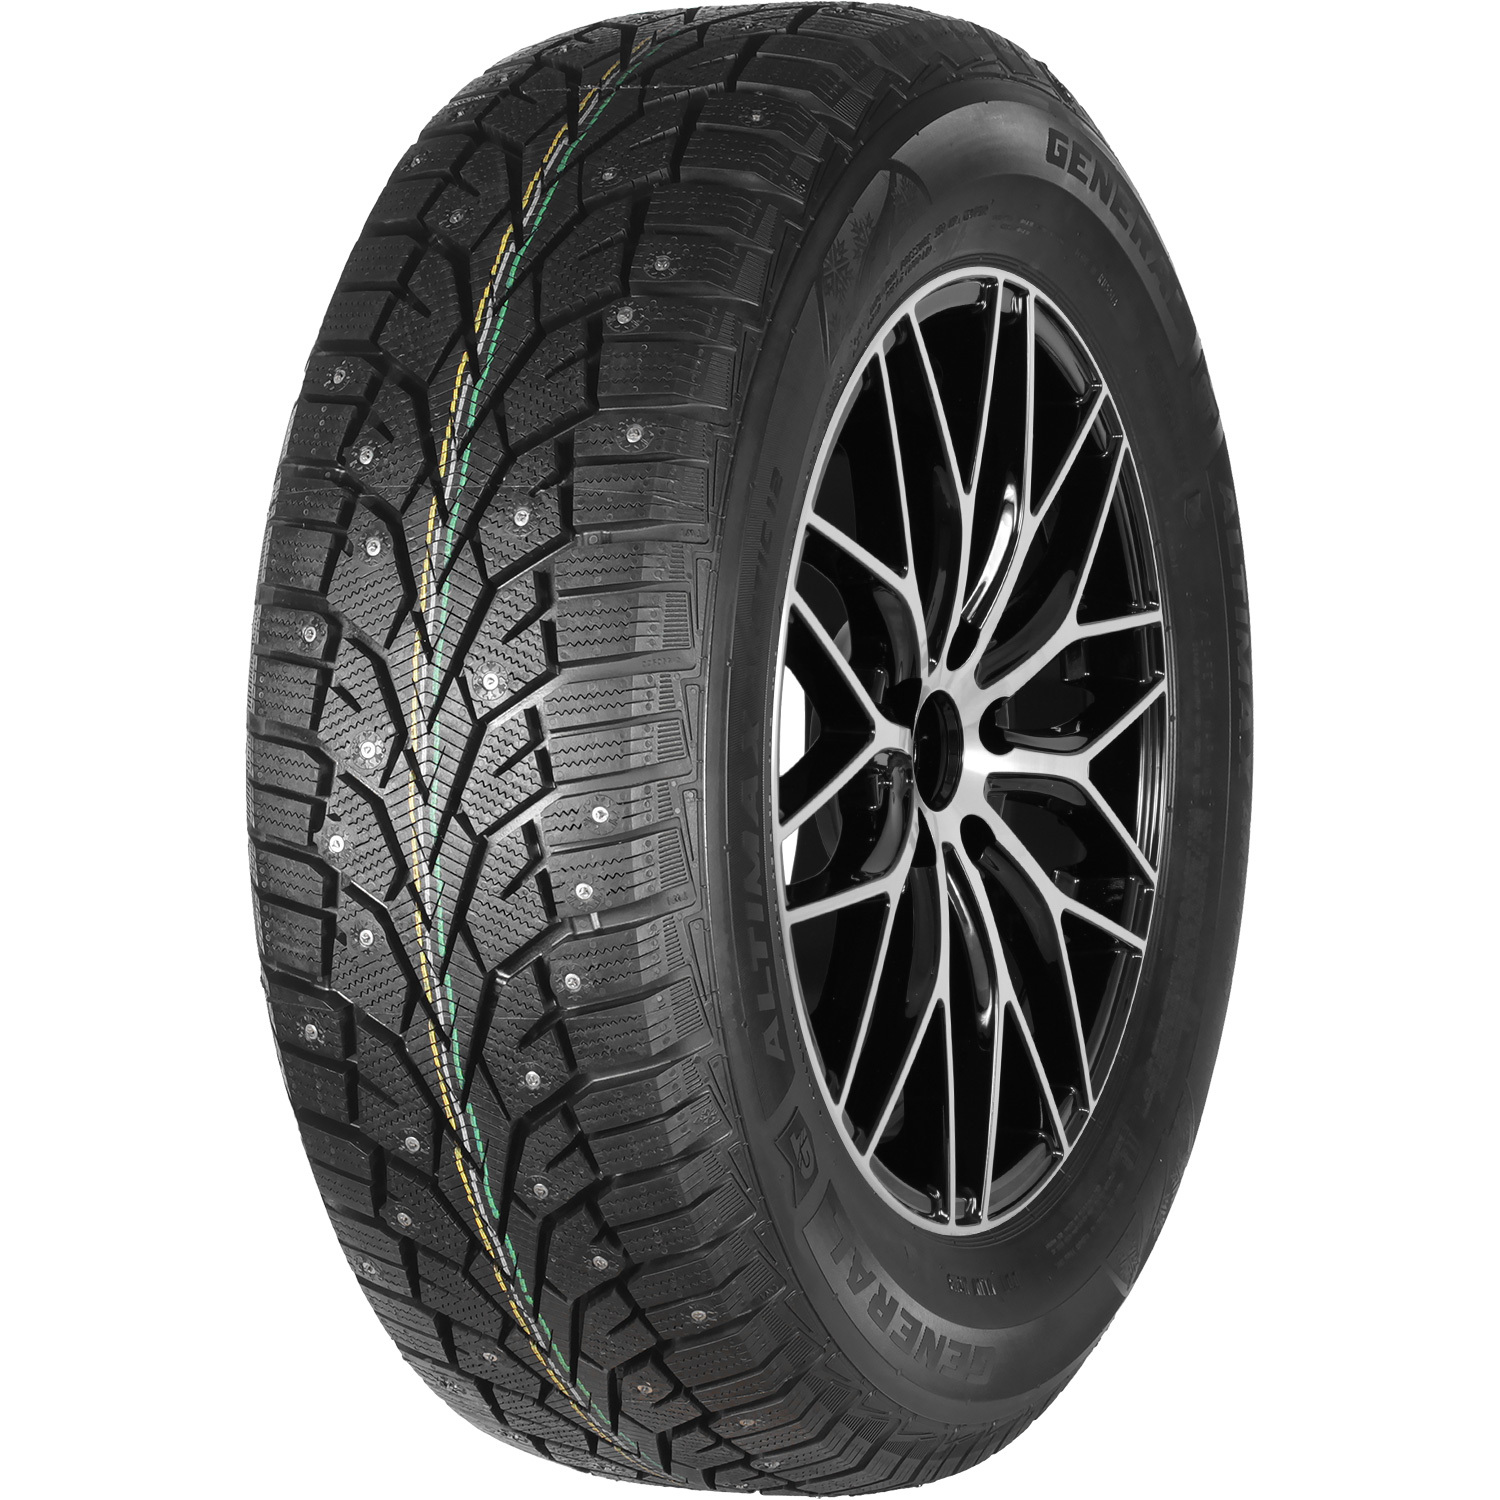 Автомобильная шина General Tire Altimax Arctic 12 205/65 R15 99T Шипованные camping spare tire cover car accessories custom spare tire covers your own personalized design tire protectors